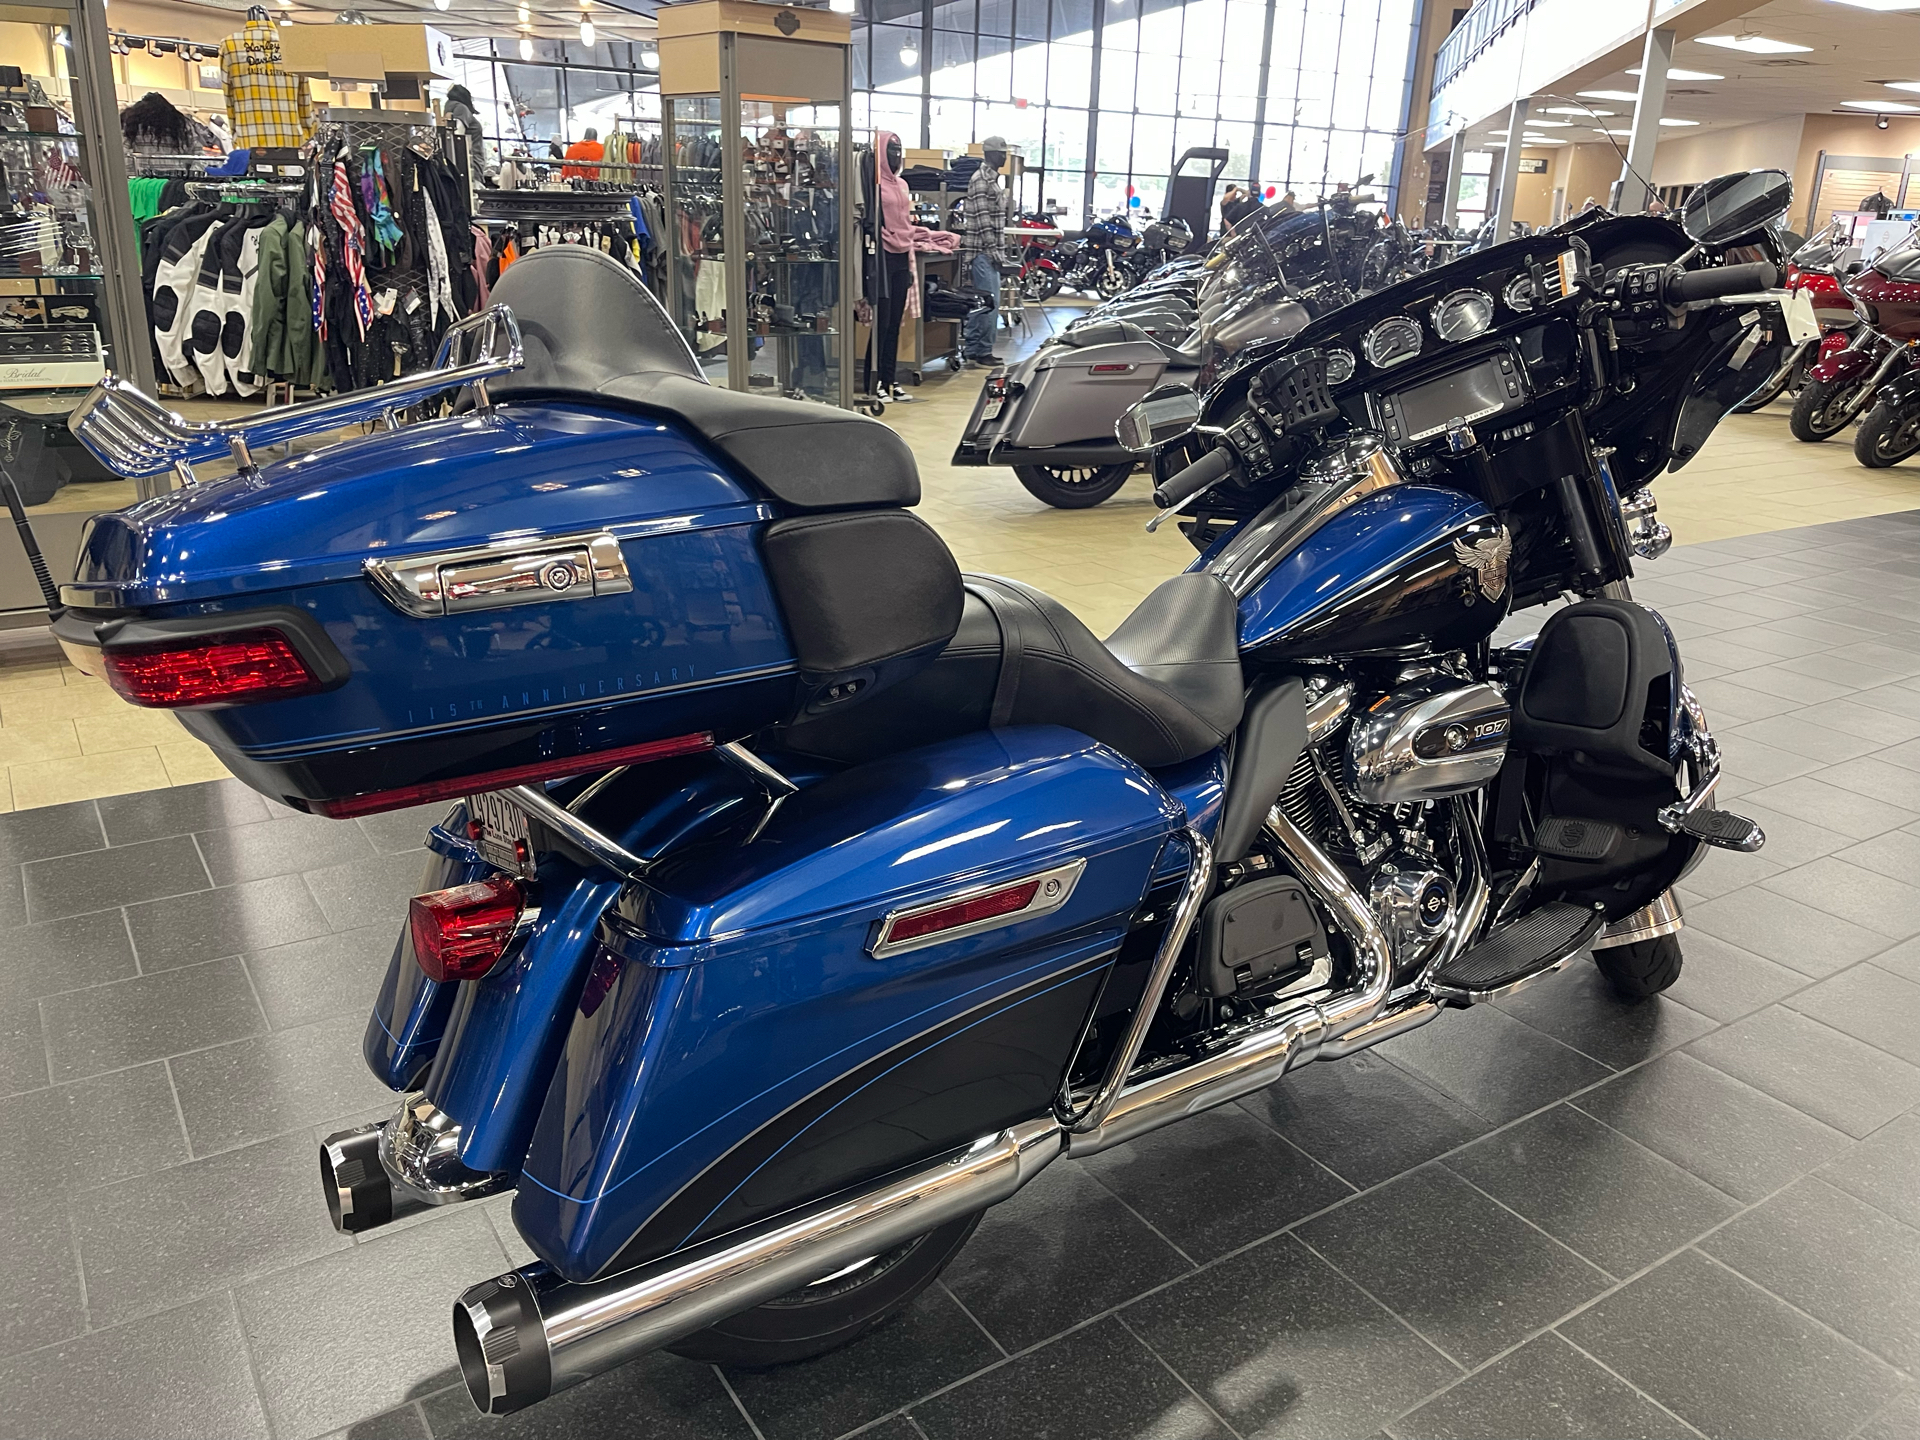 2018 Harley-Davidson Electra Glide® Ultra Classic® in The Woodlands, Texas - Photo 6